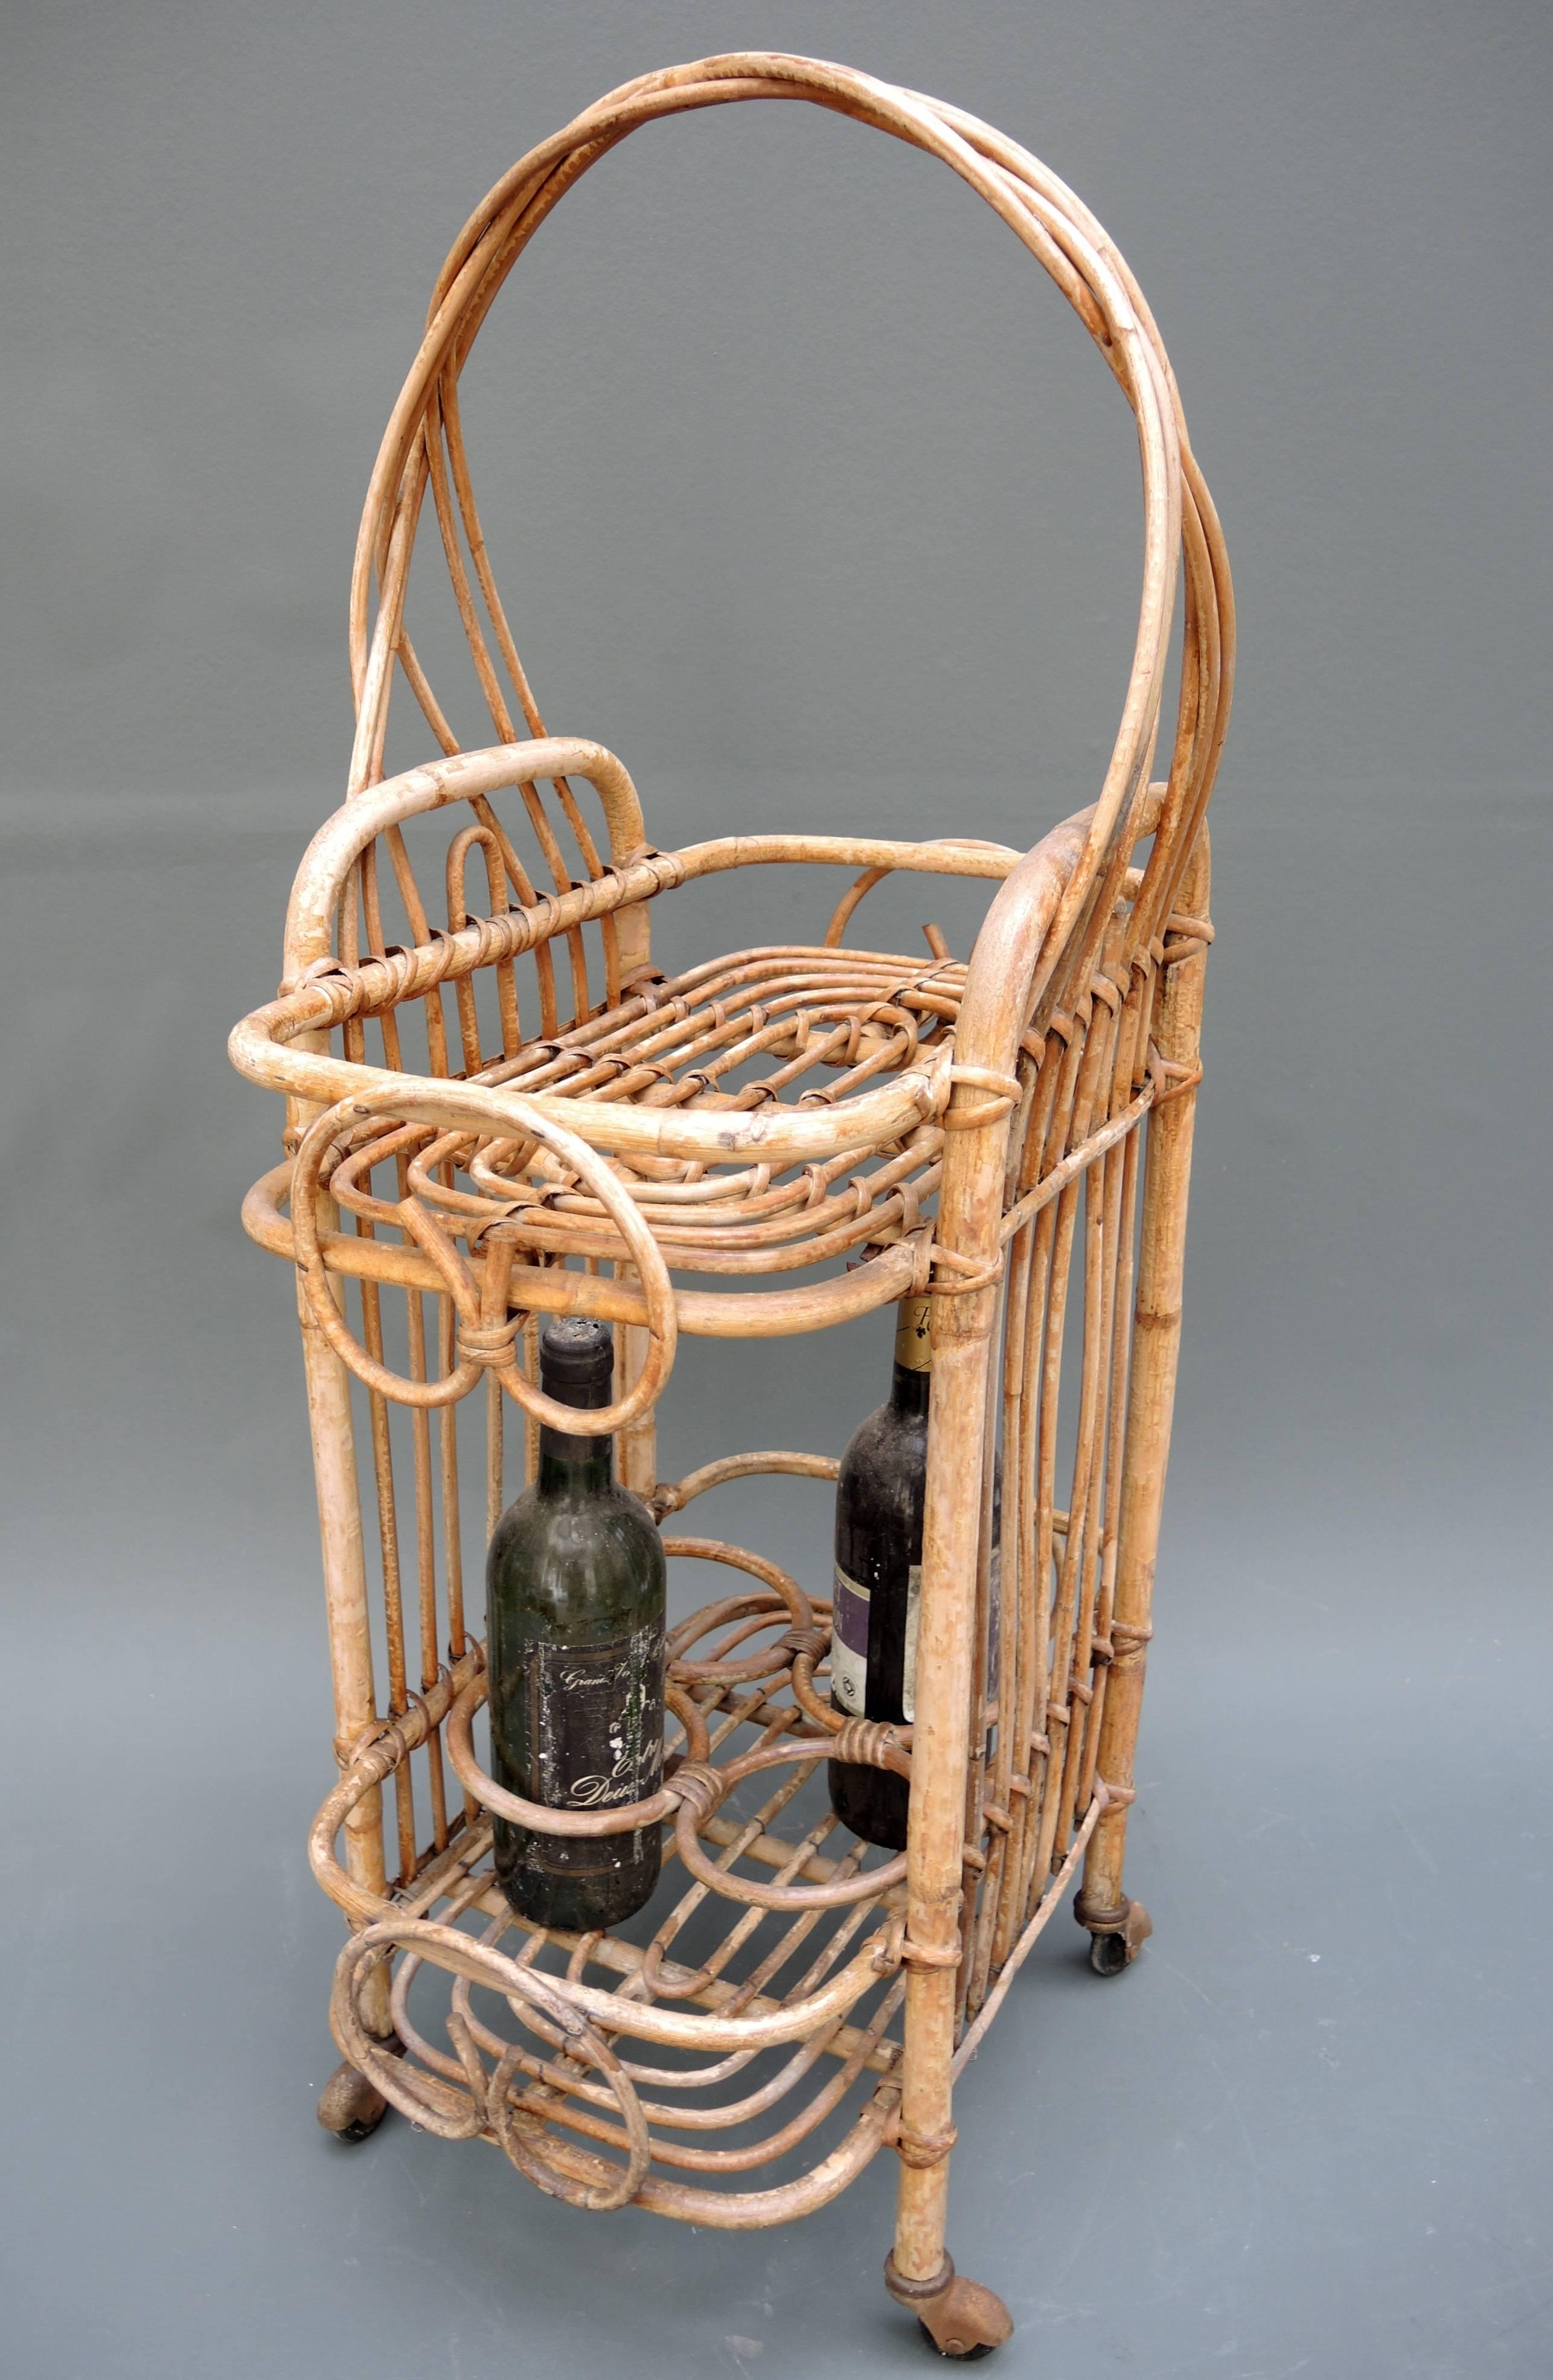 Unique small French bamboo bar cart. The perfect size for serving summer aperitifs and wine! Very good sturdy condition with the original wheels and an elegant braided handle. The wine bottles pictured are not included but shown for size reference.